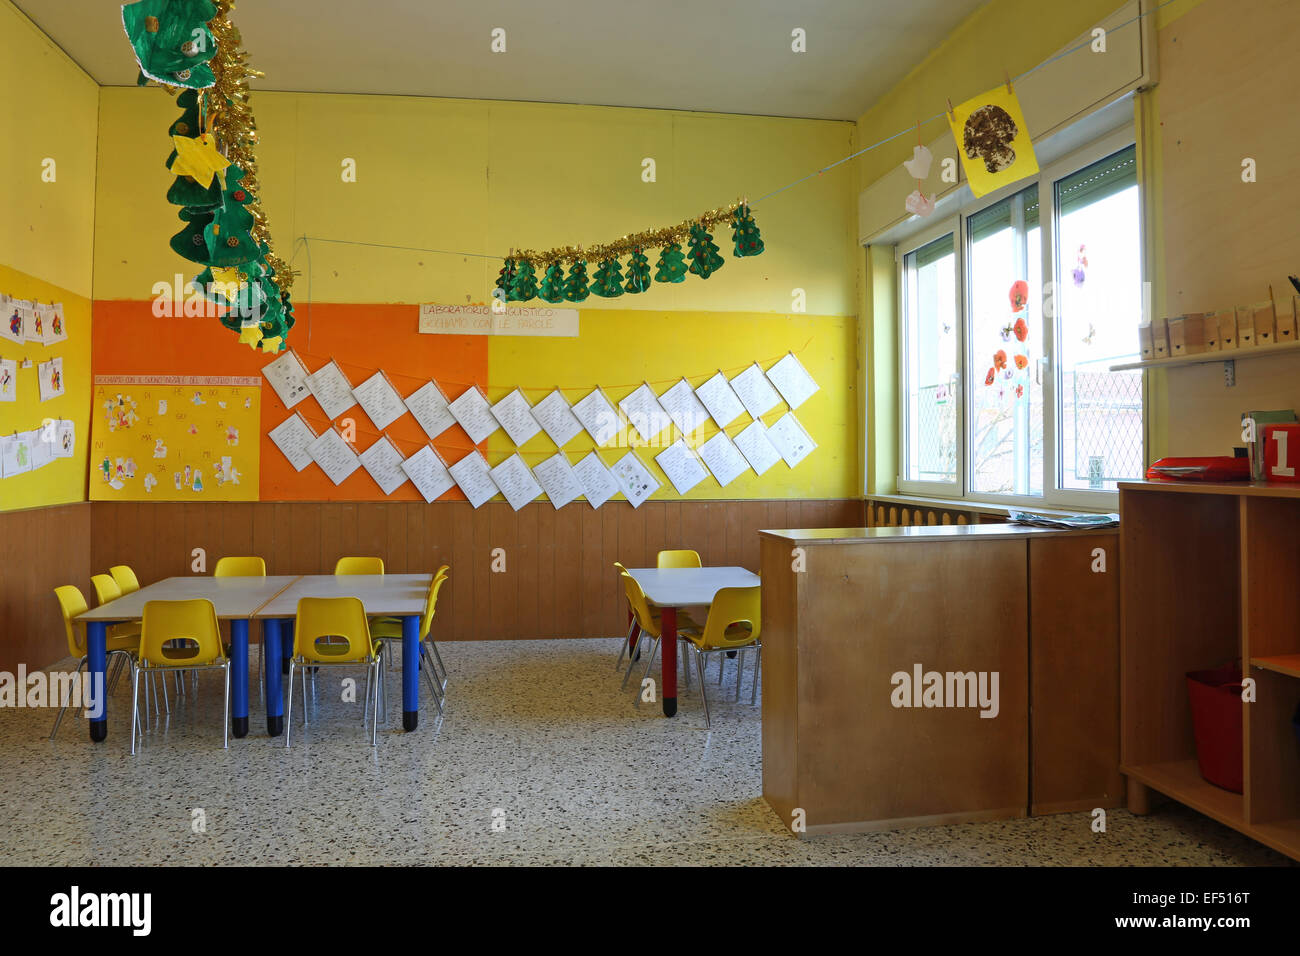 Preschool classroom with yellow chairs and table with drawings of children hanging on the walls Stock Photo